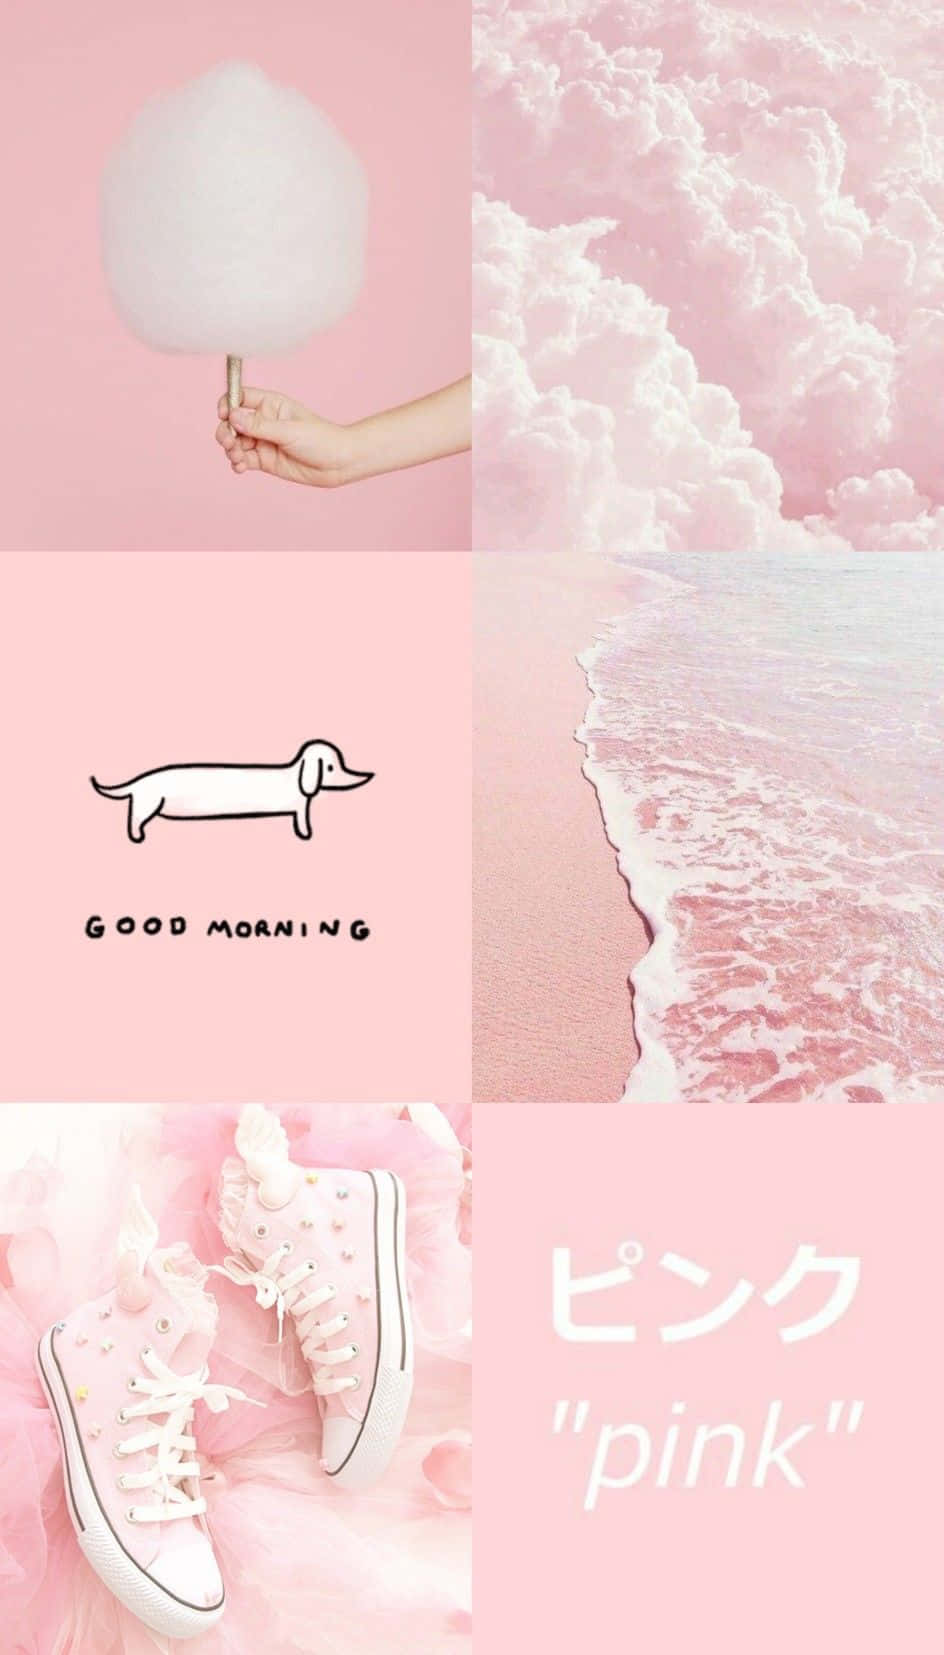 pink, clouds, and a dog are shown in a collage